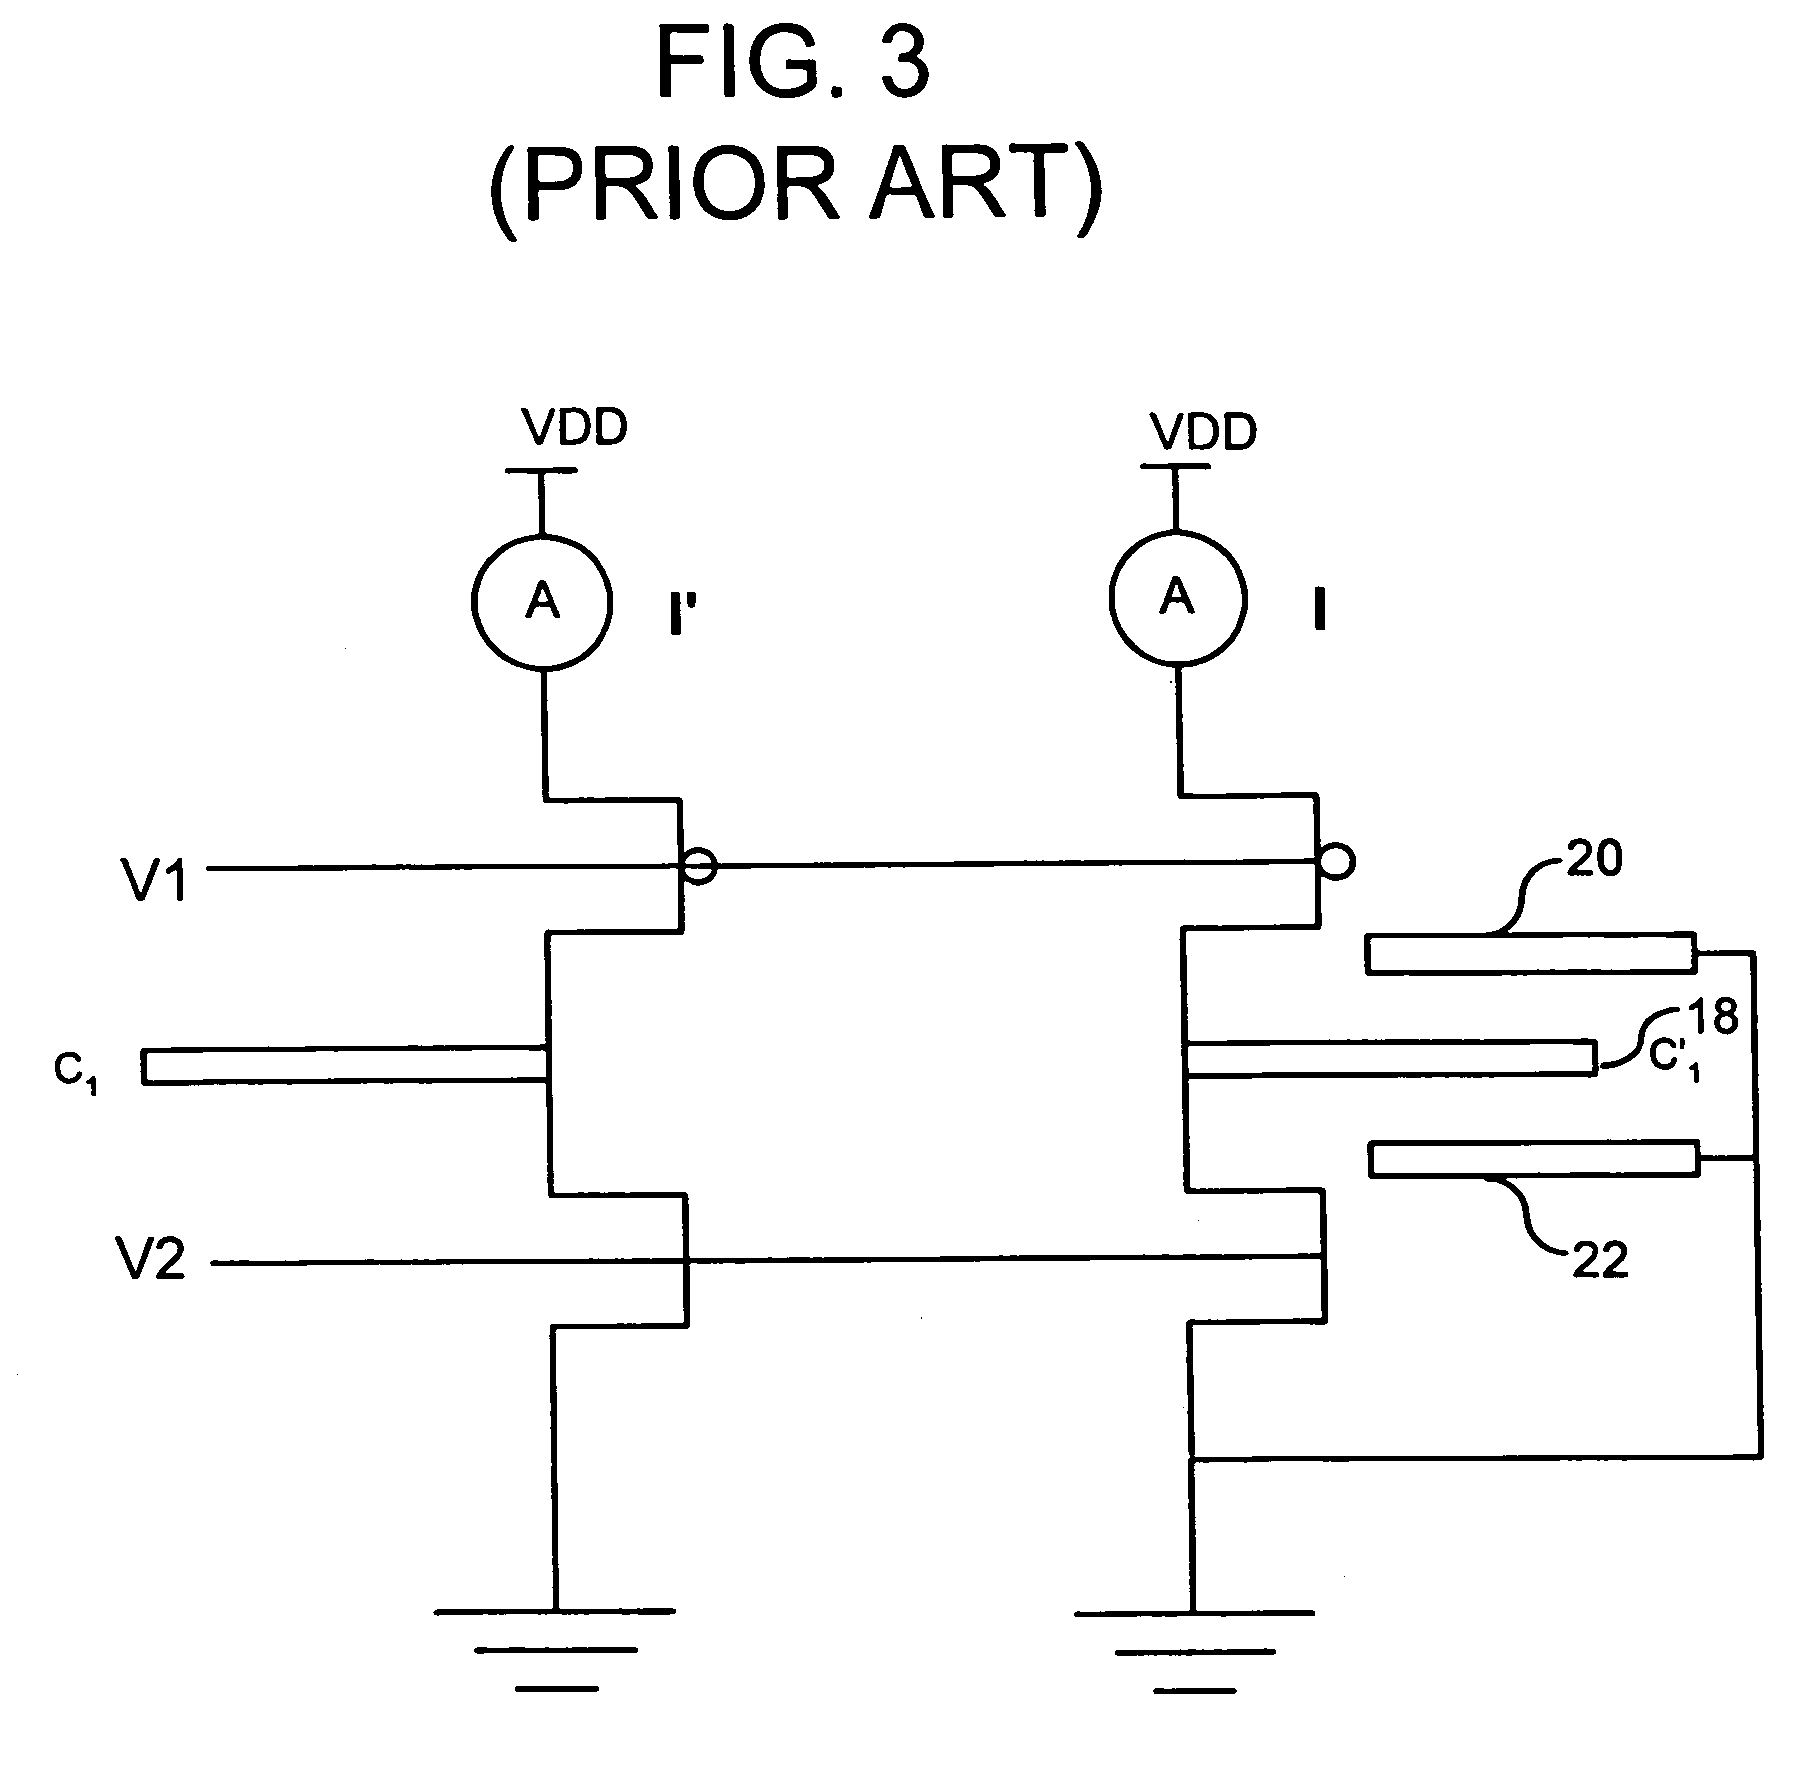 Capacitance measurements for an integrated circuit